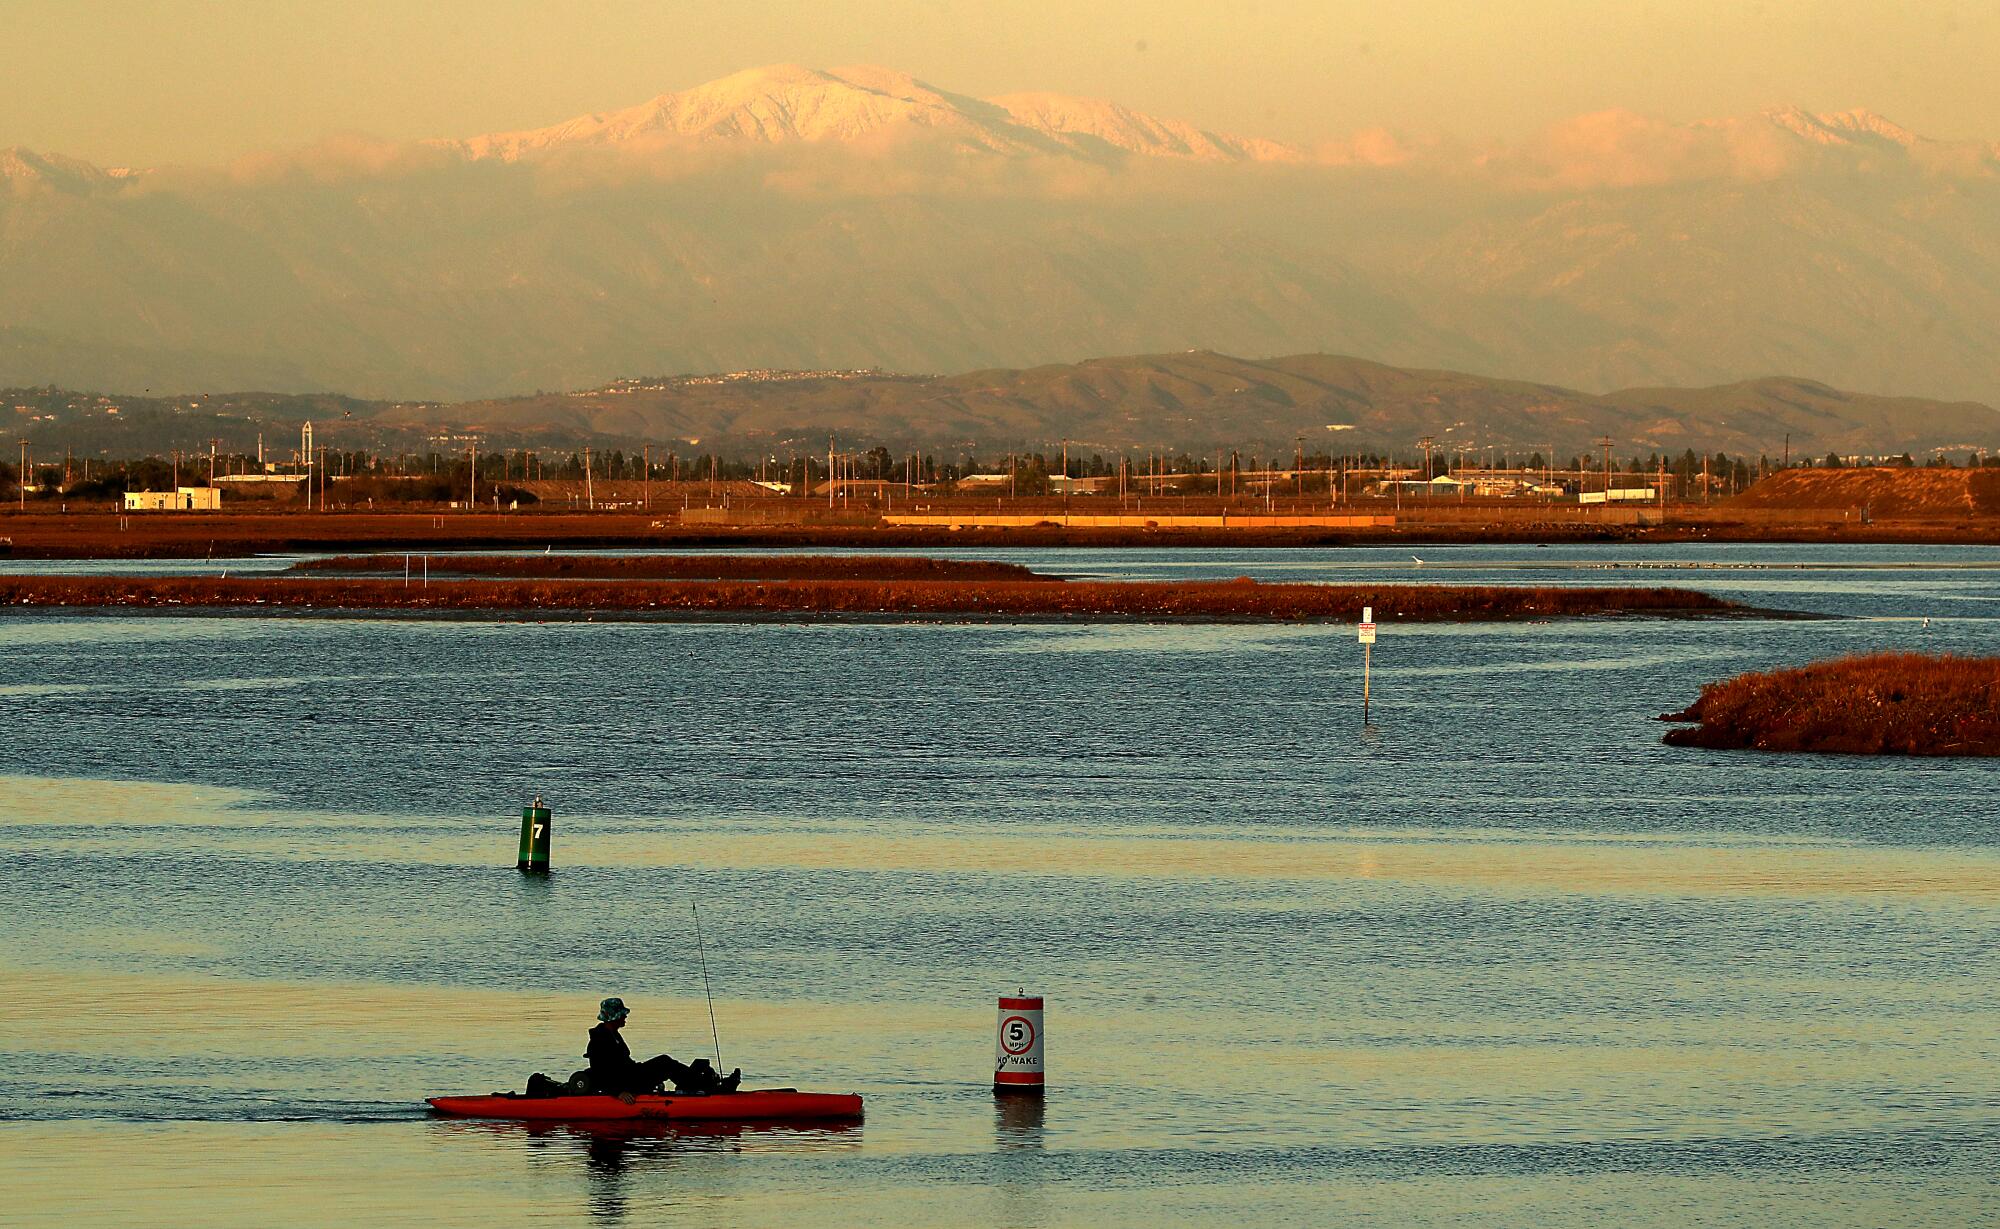 A light dusting of snow covers Mt. Baldy as seen from Sunset Beach on Tuesday.